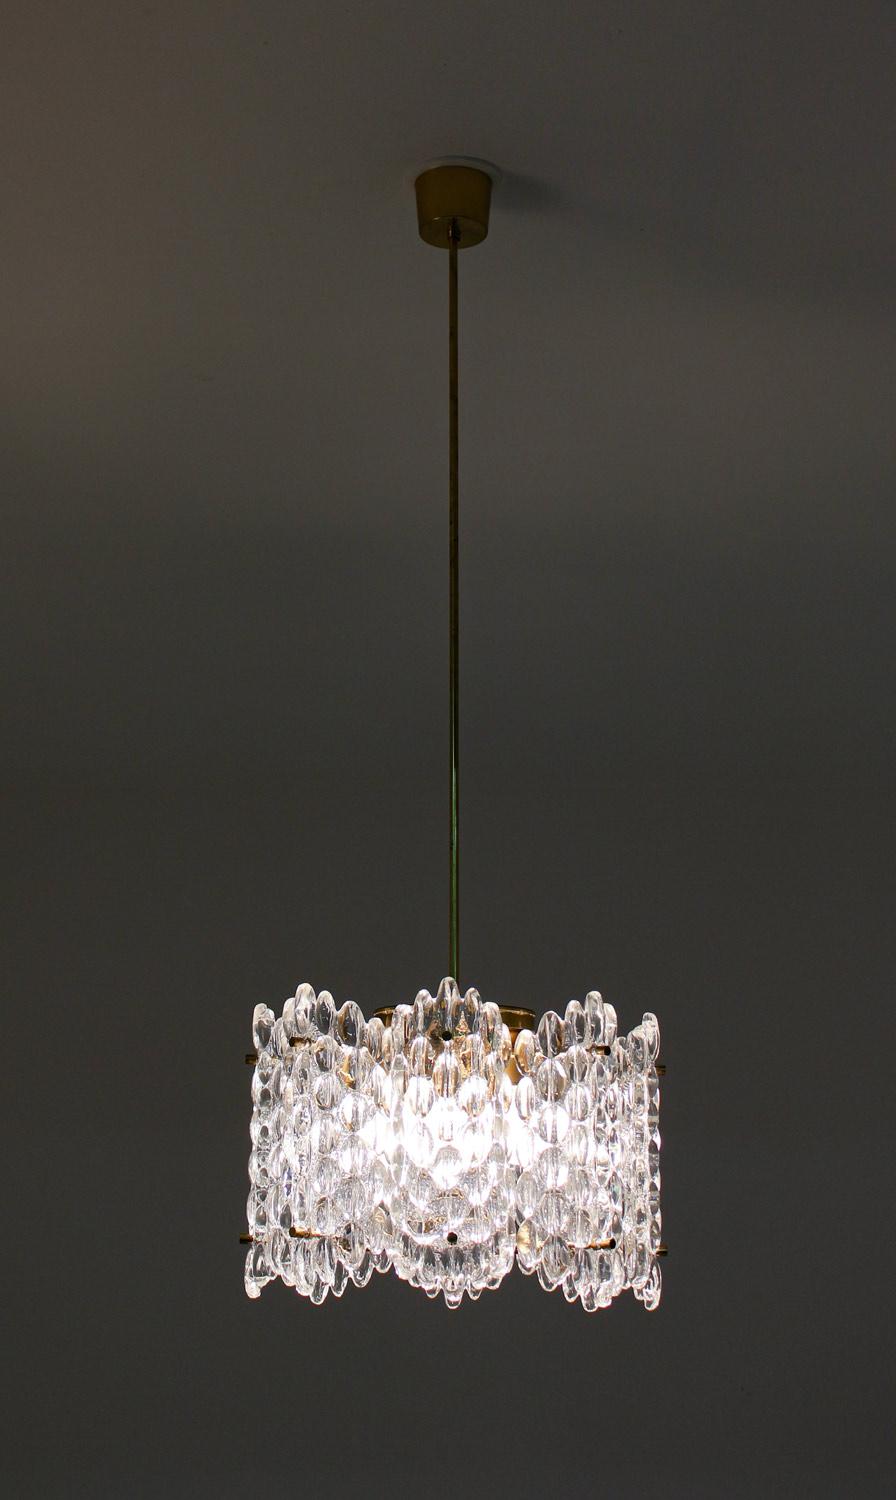 20th Century Pair of Swedish Midcentury Chandeliers by Carl Fagerlund for Orrefors